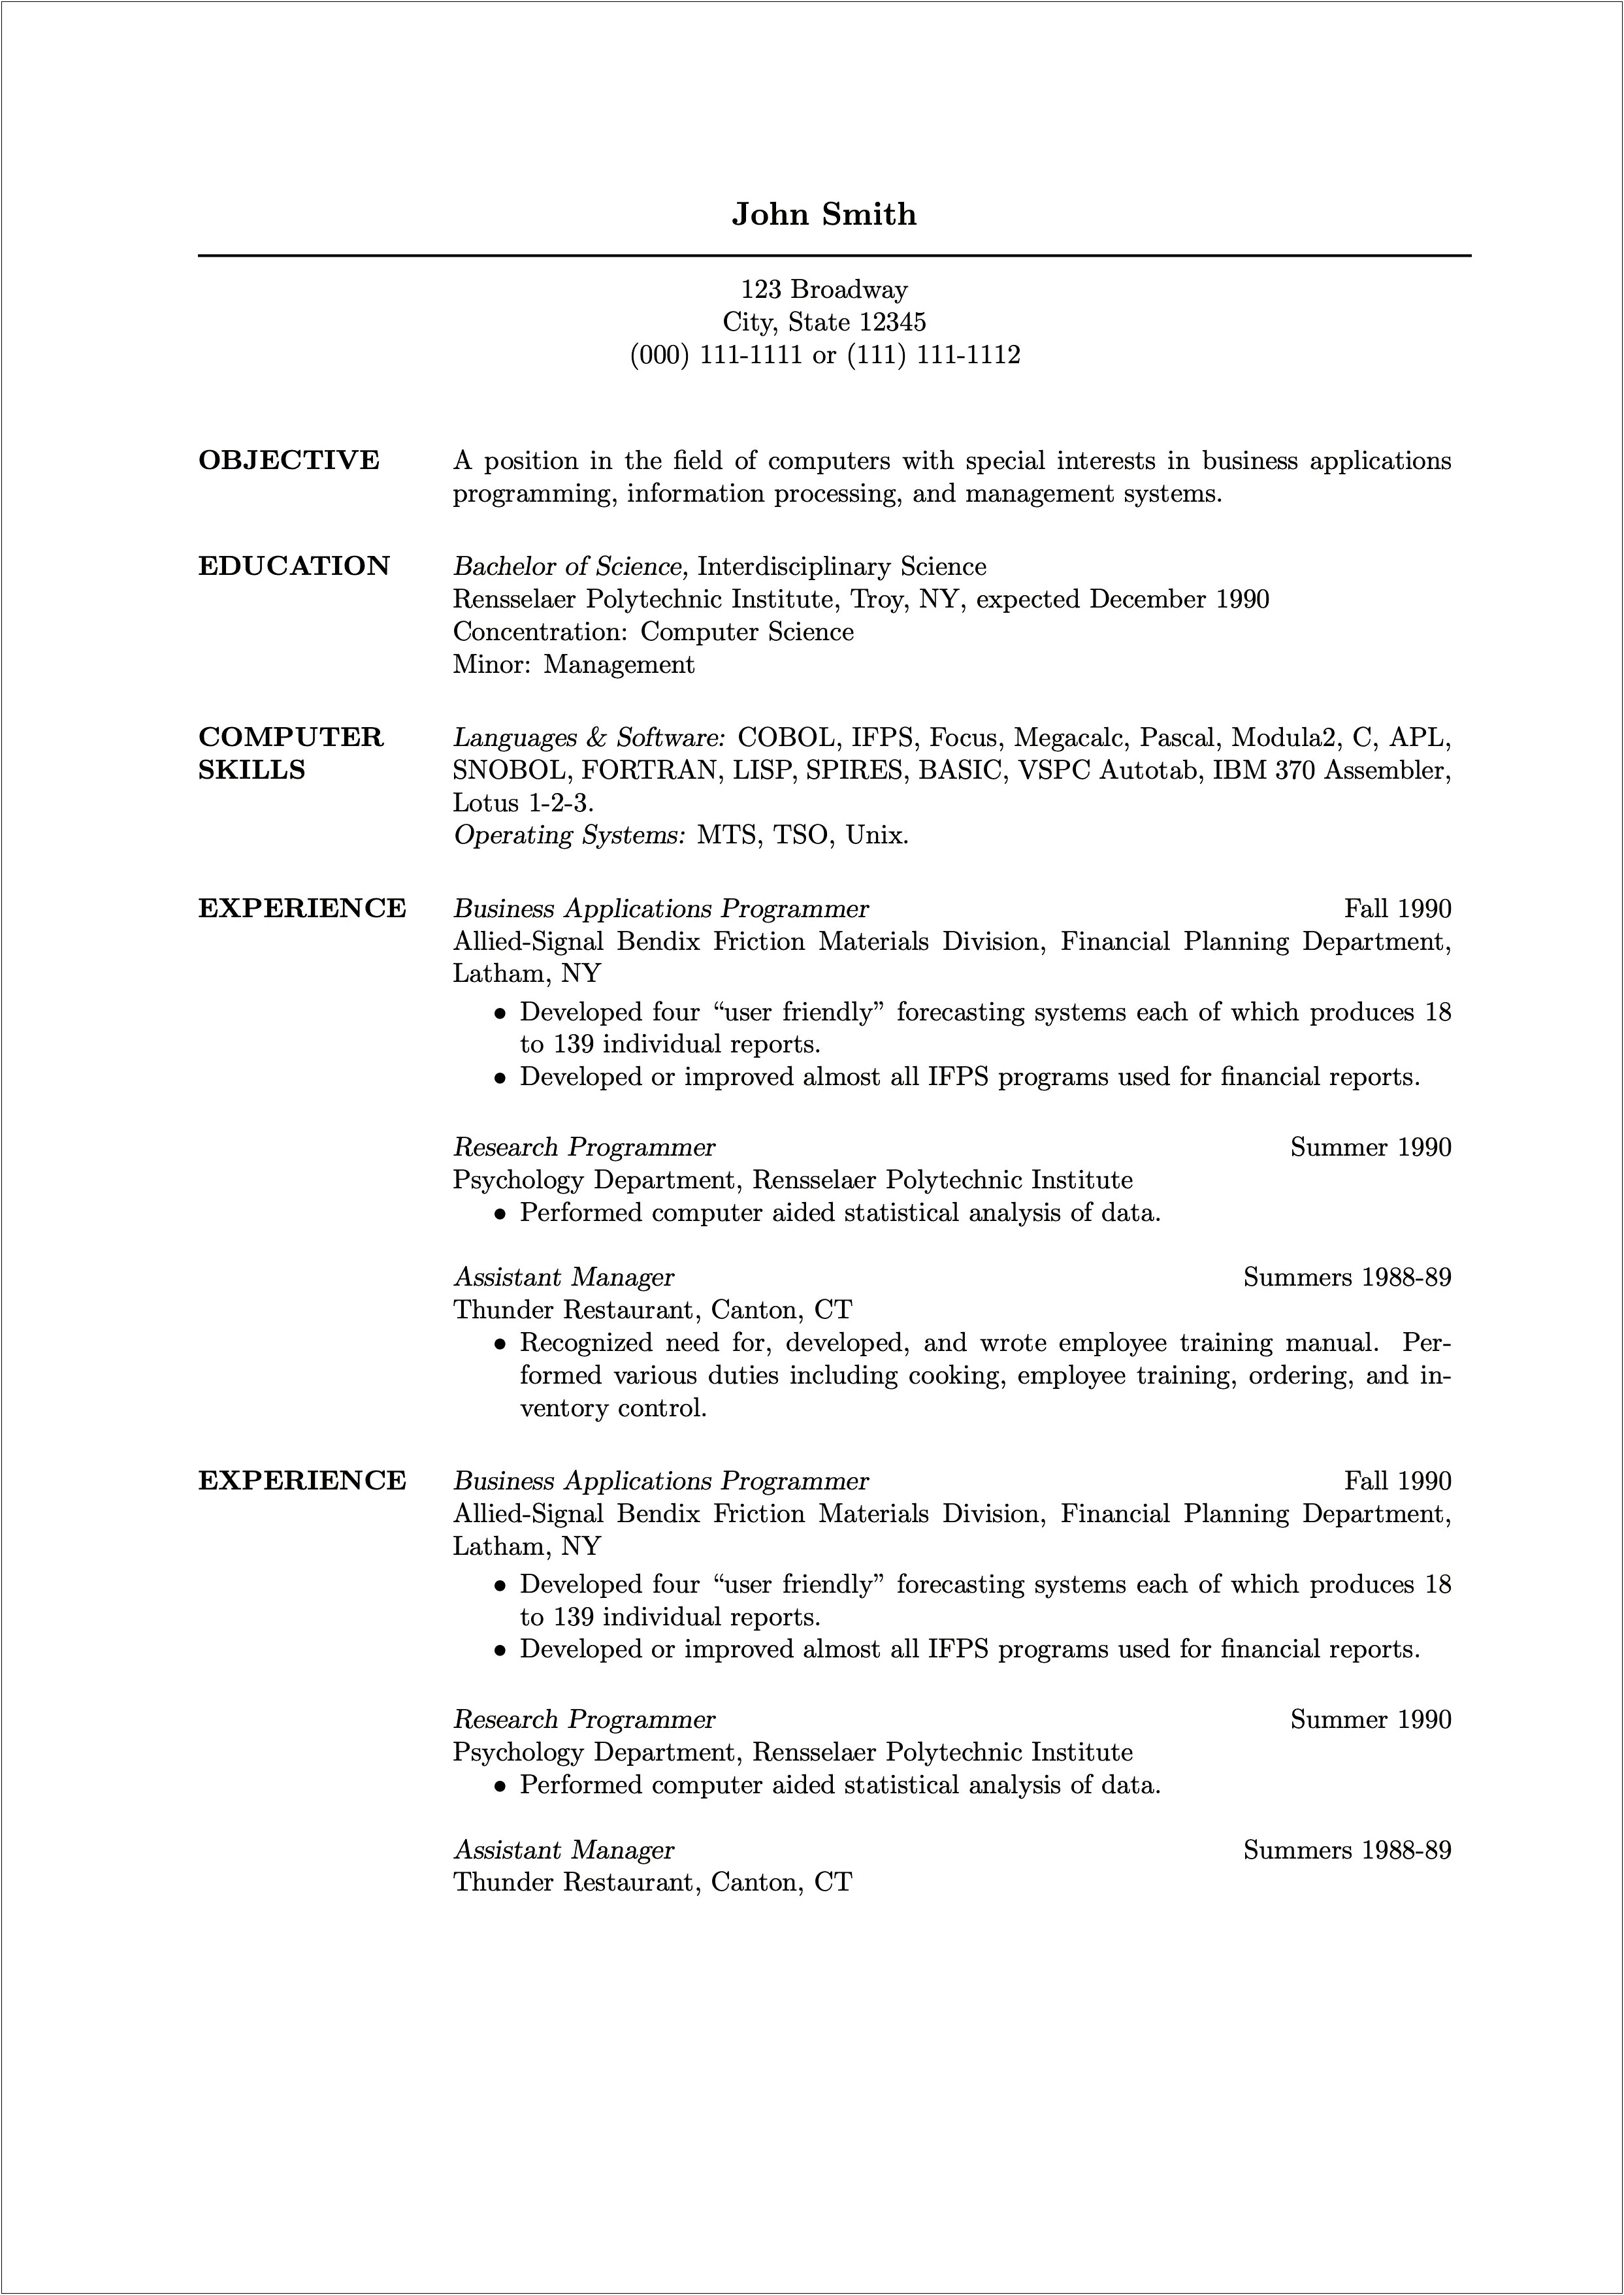 Resume For School Manager Position